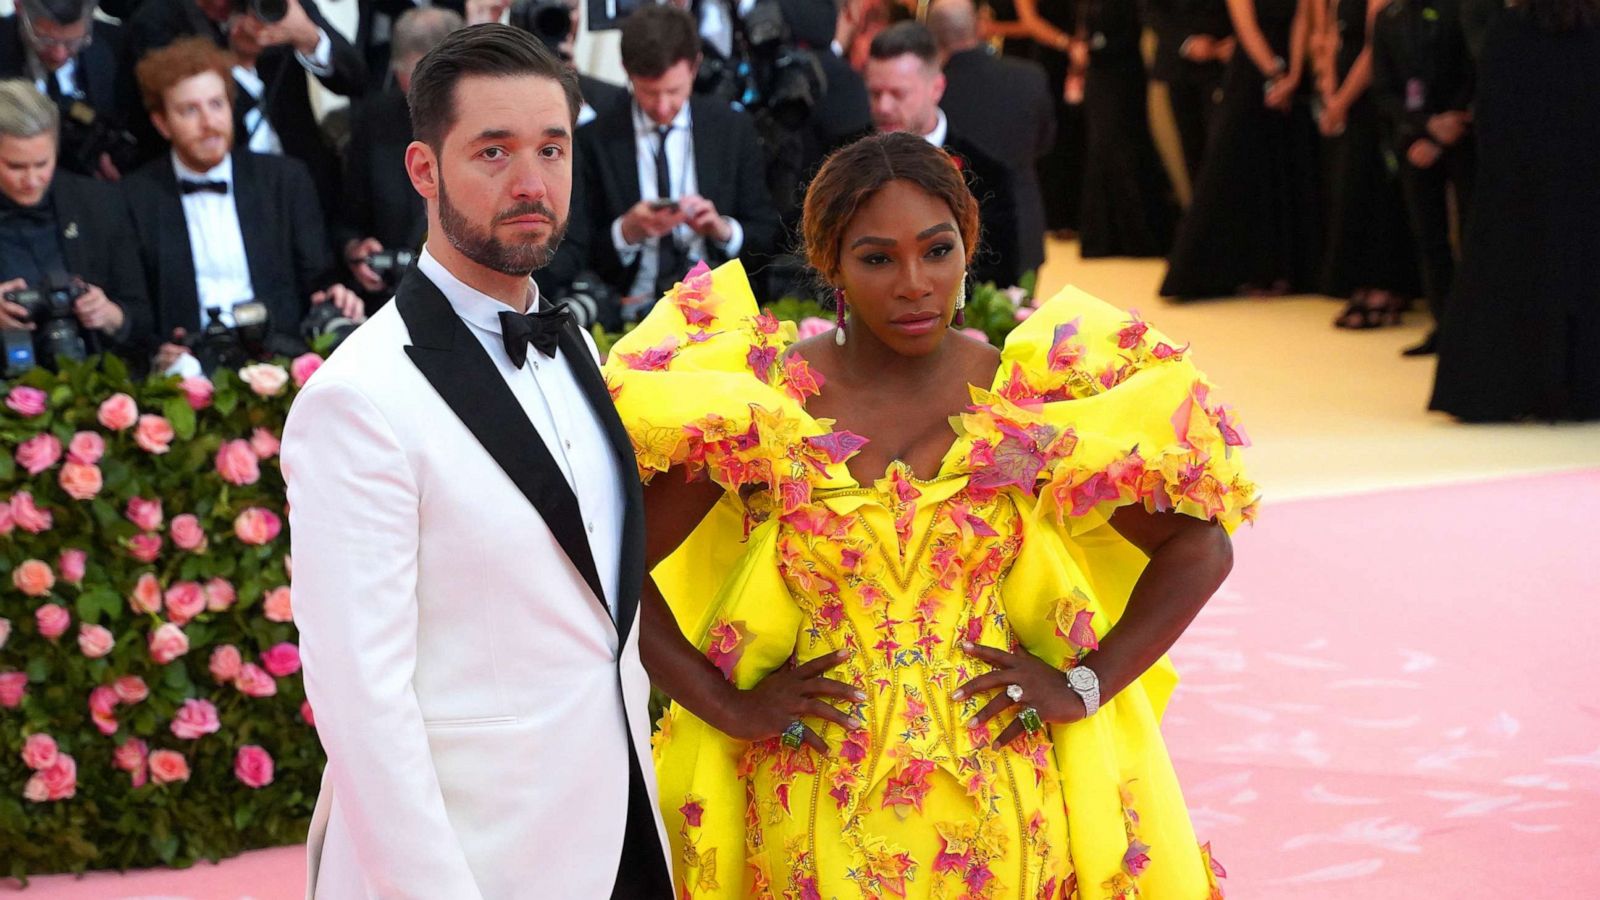 PHOTO: Alexis Ohanian and Serena Williams attends The Metropolitan Museum Of Art's 2019 Costume Institute Benefit "Camp: Notes On Fashion" at Metropolitan Museum of Art, May 6, 2019, in New York City.